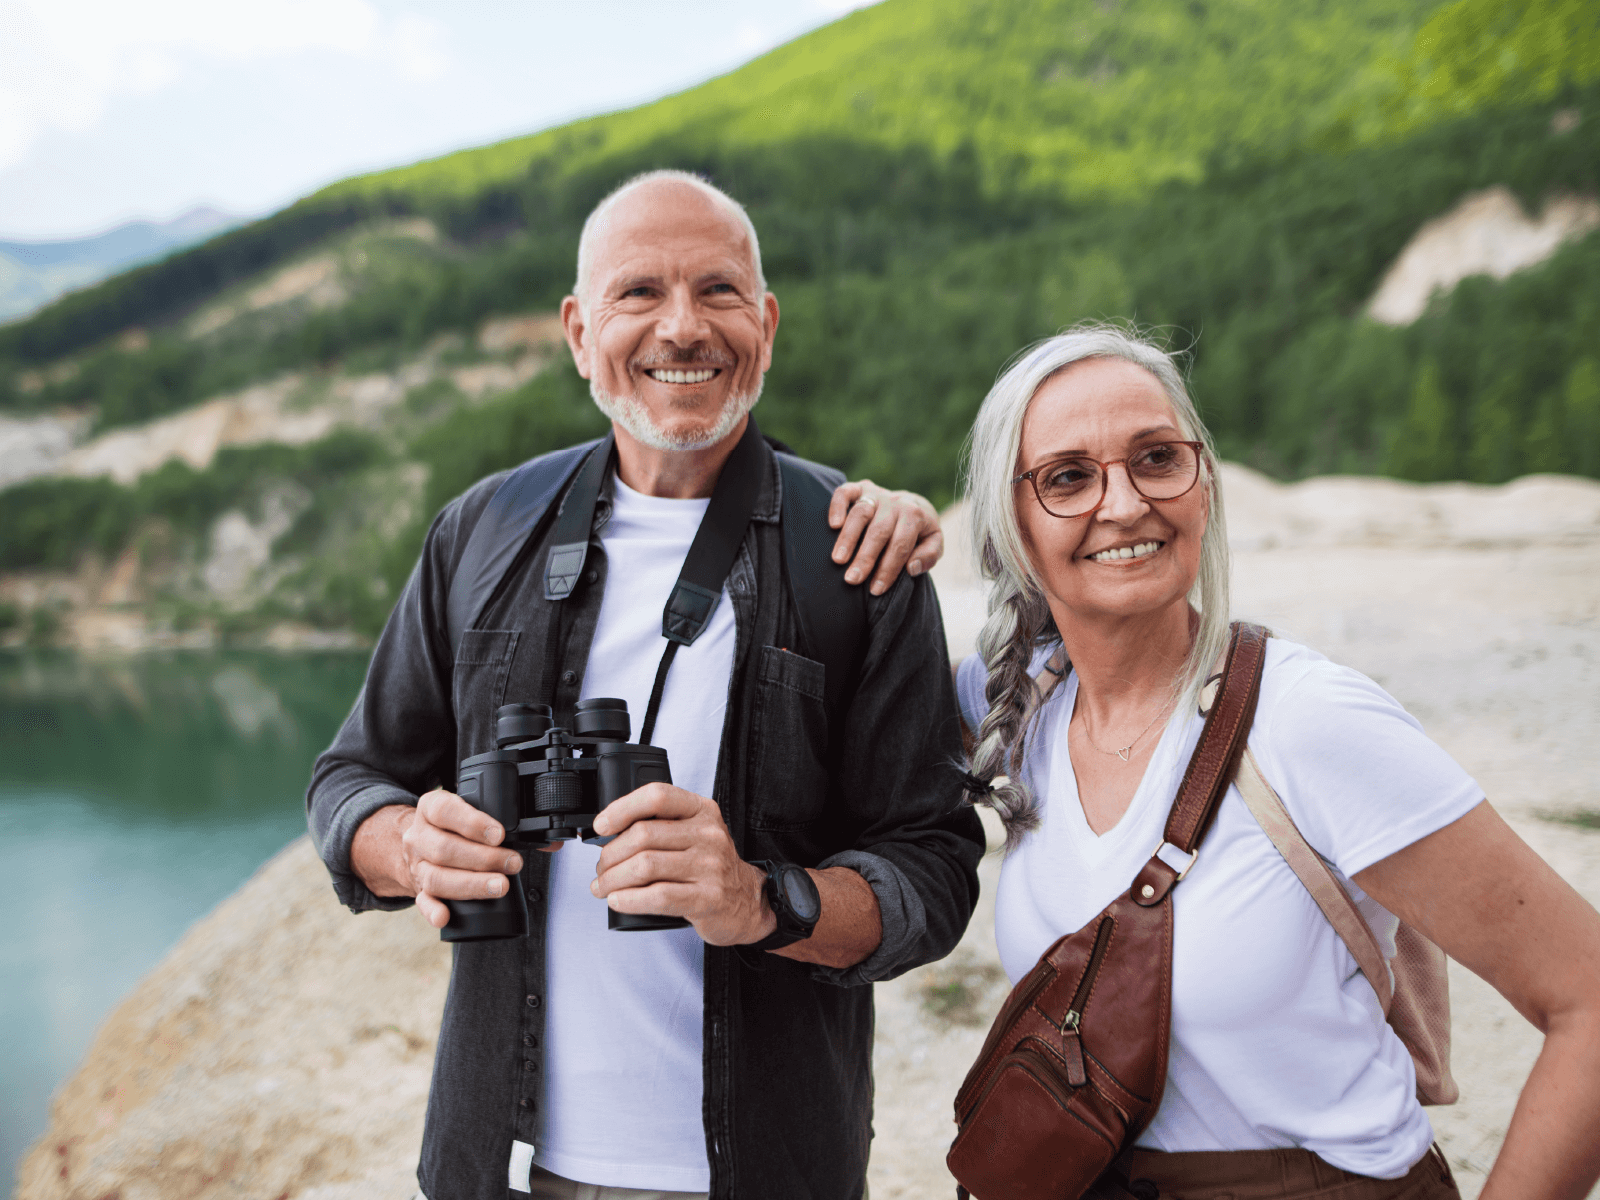 An older white man and woman are smiling while on a hike. The man is holding a pair of binoculars and has a beard. The woman has a sling bag and wears glasses and has her hair in a braid. The background is a mountain with green trees and a lake below. 